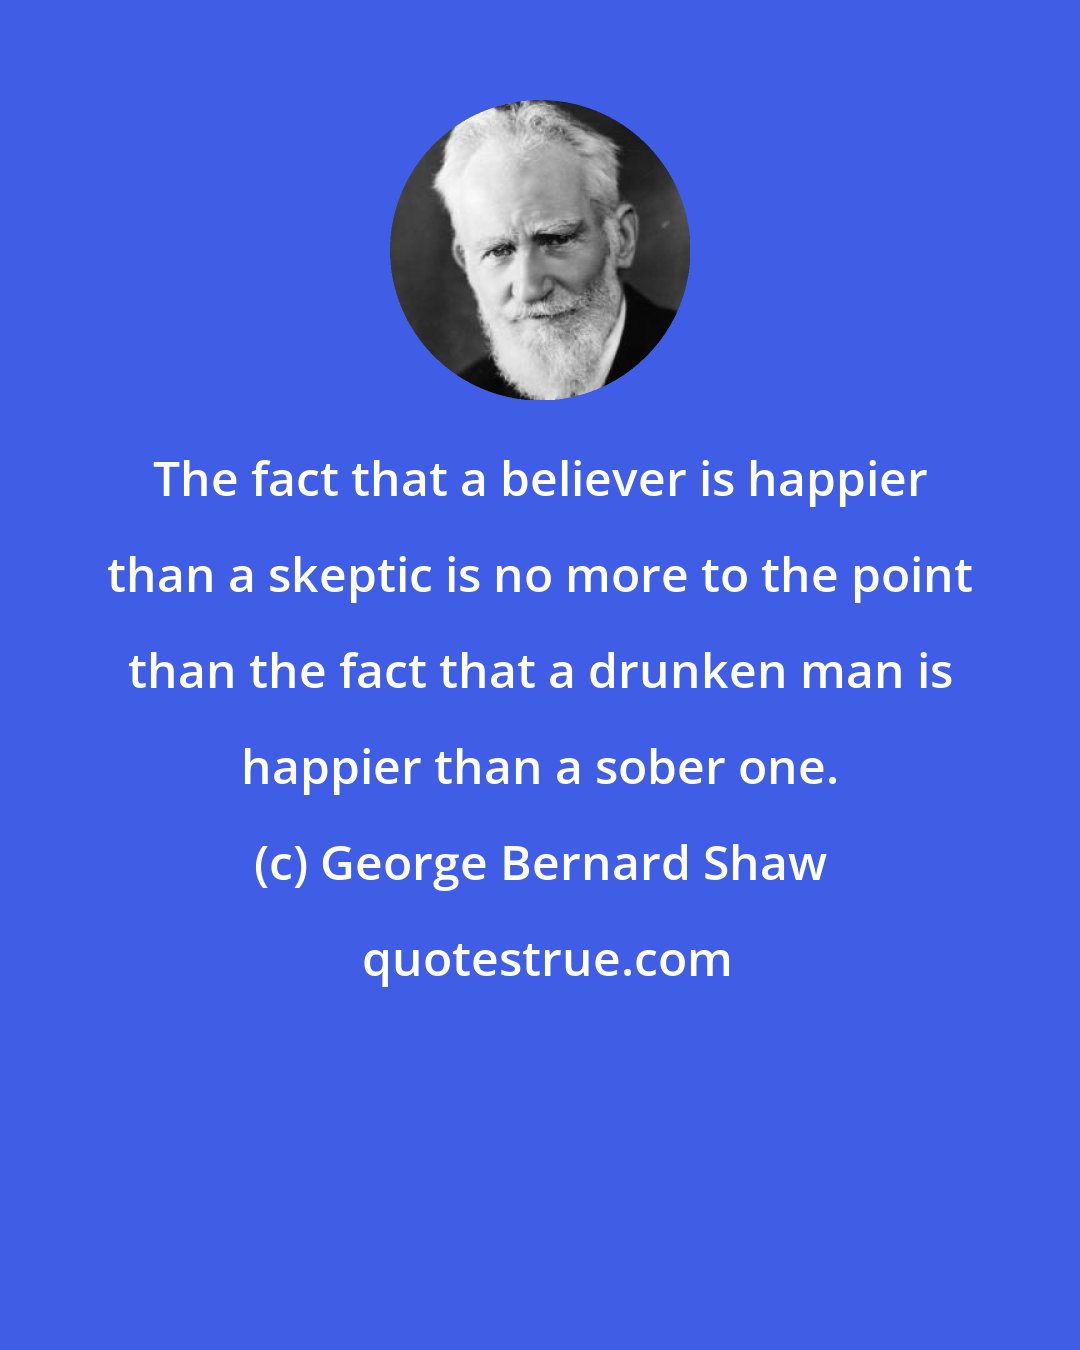 George Bernard Shaw: The fact that a believer is happier than a skeptic is no more to the point than the fact that a drunken man is happier than a sober one.